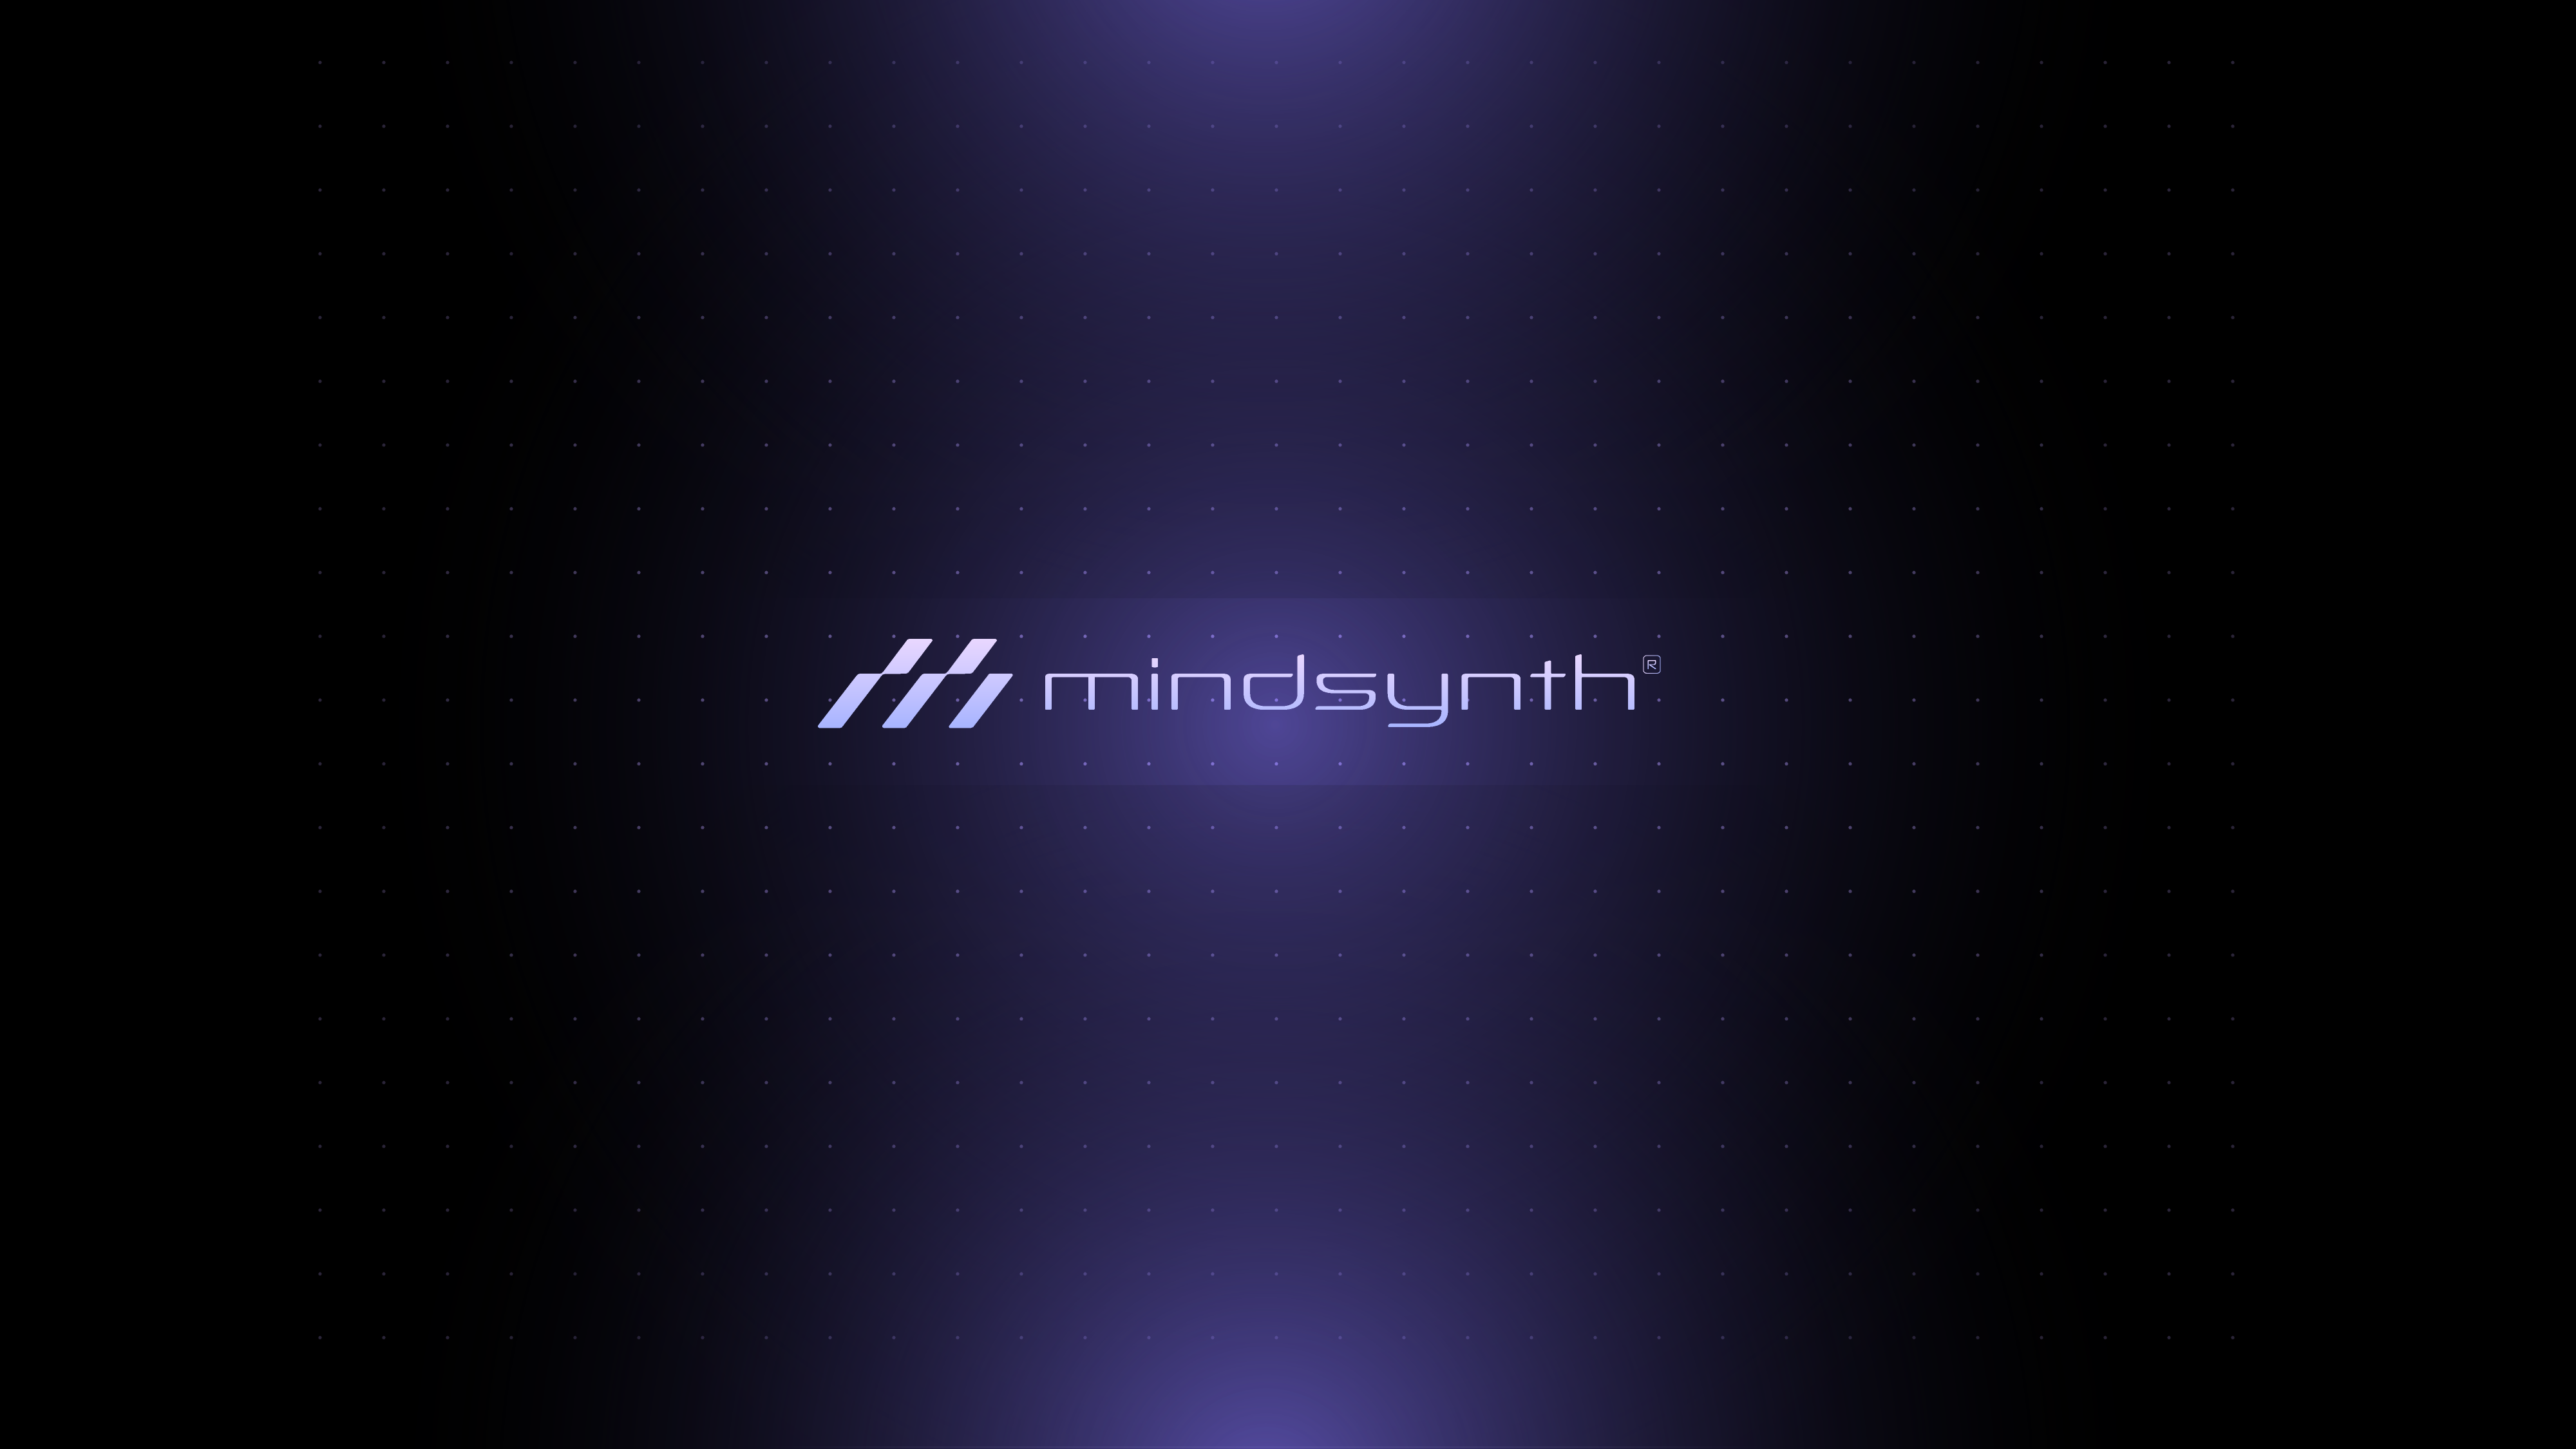 Welcome to MindSynth